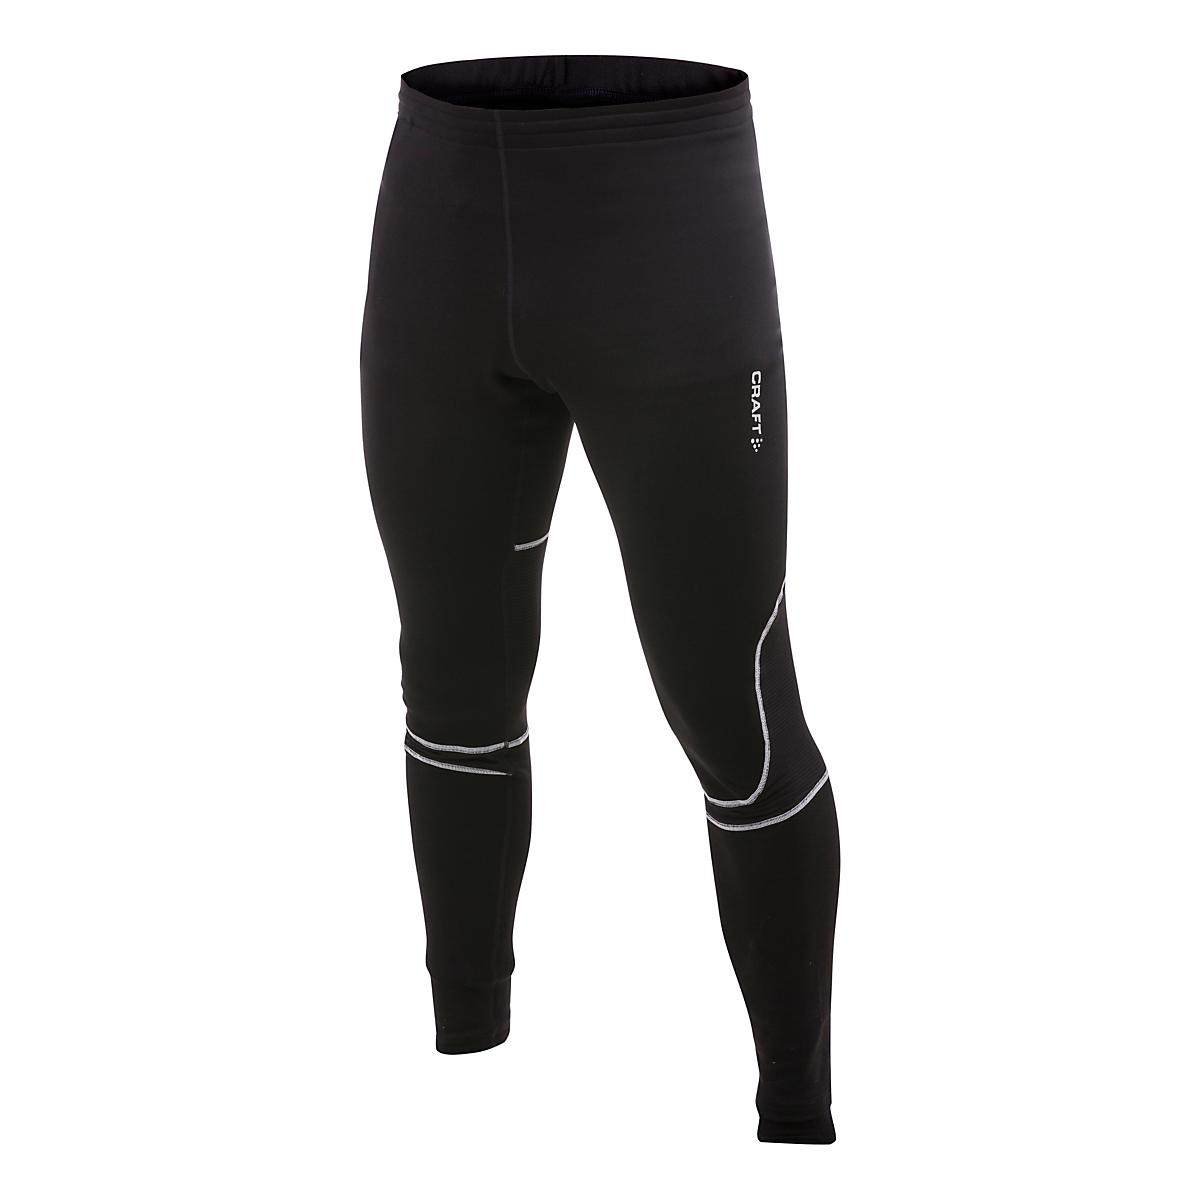 Mens CW-X Insulator Stabilyx Fitted Tights at Road Runner Sports